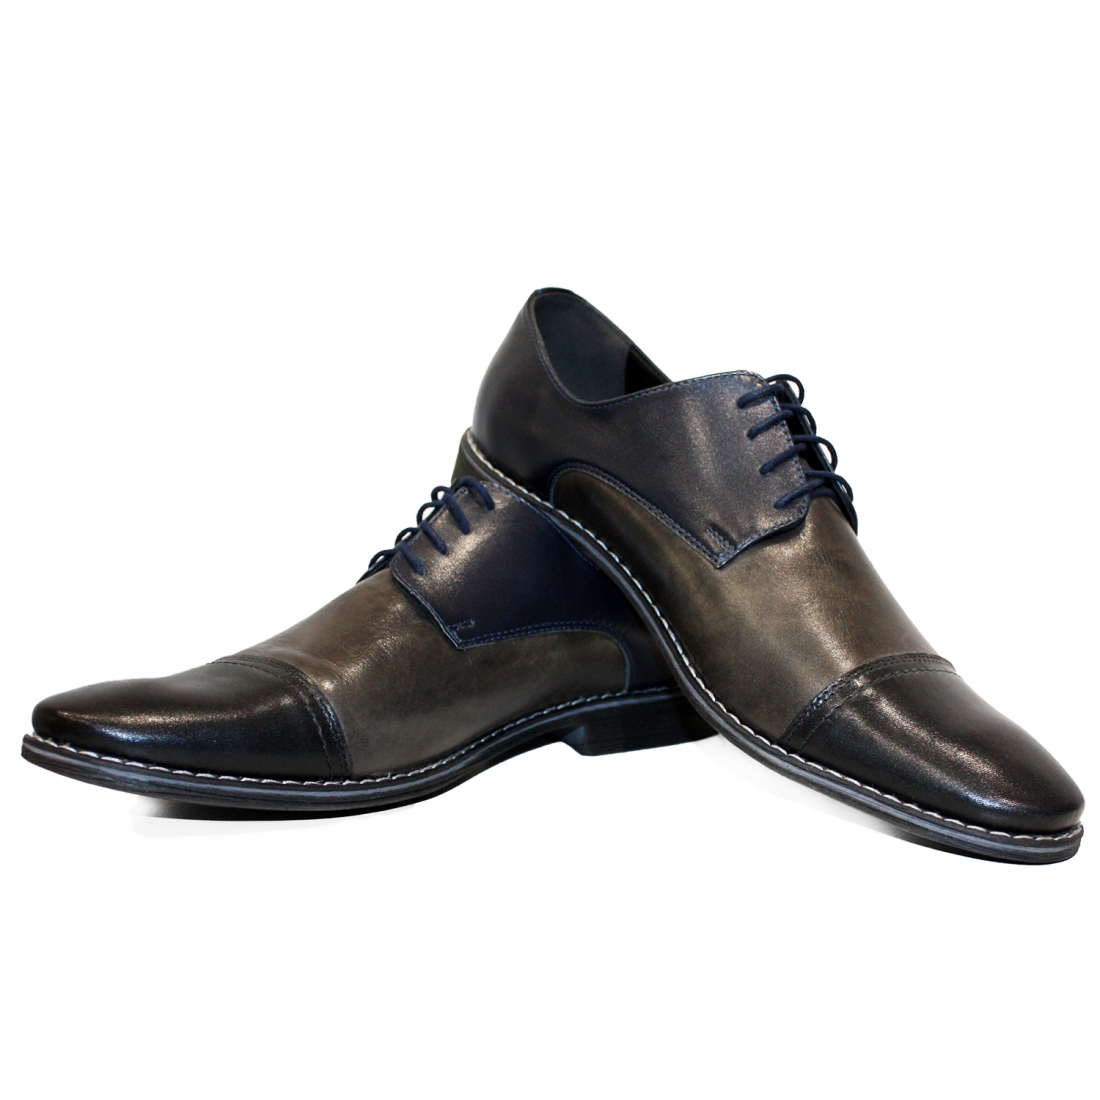 Modello Jeter - Classic Shoes - Handmade Colorful Italian Leather Shoes